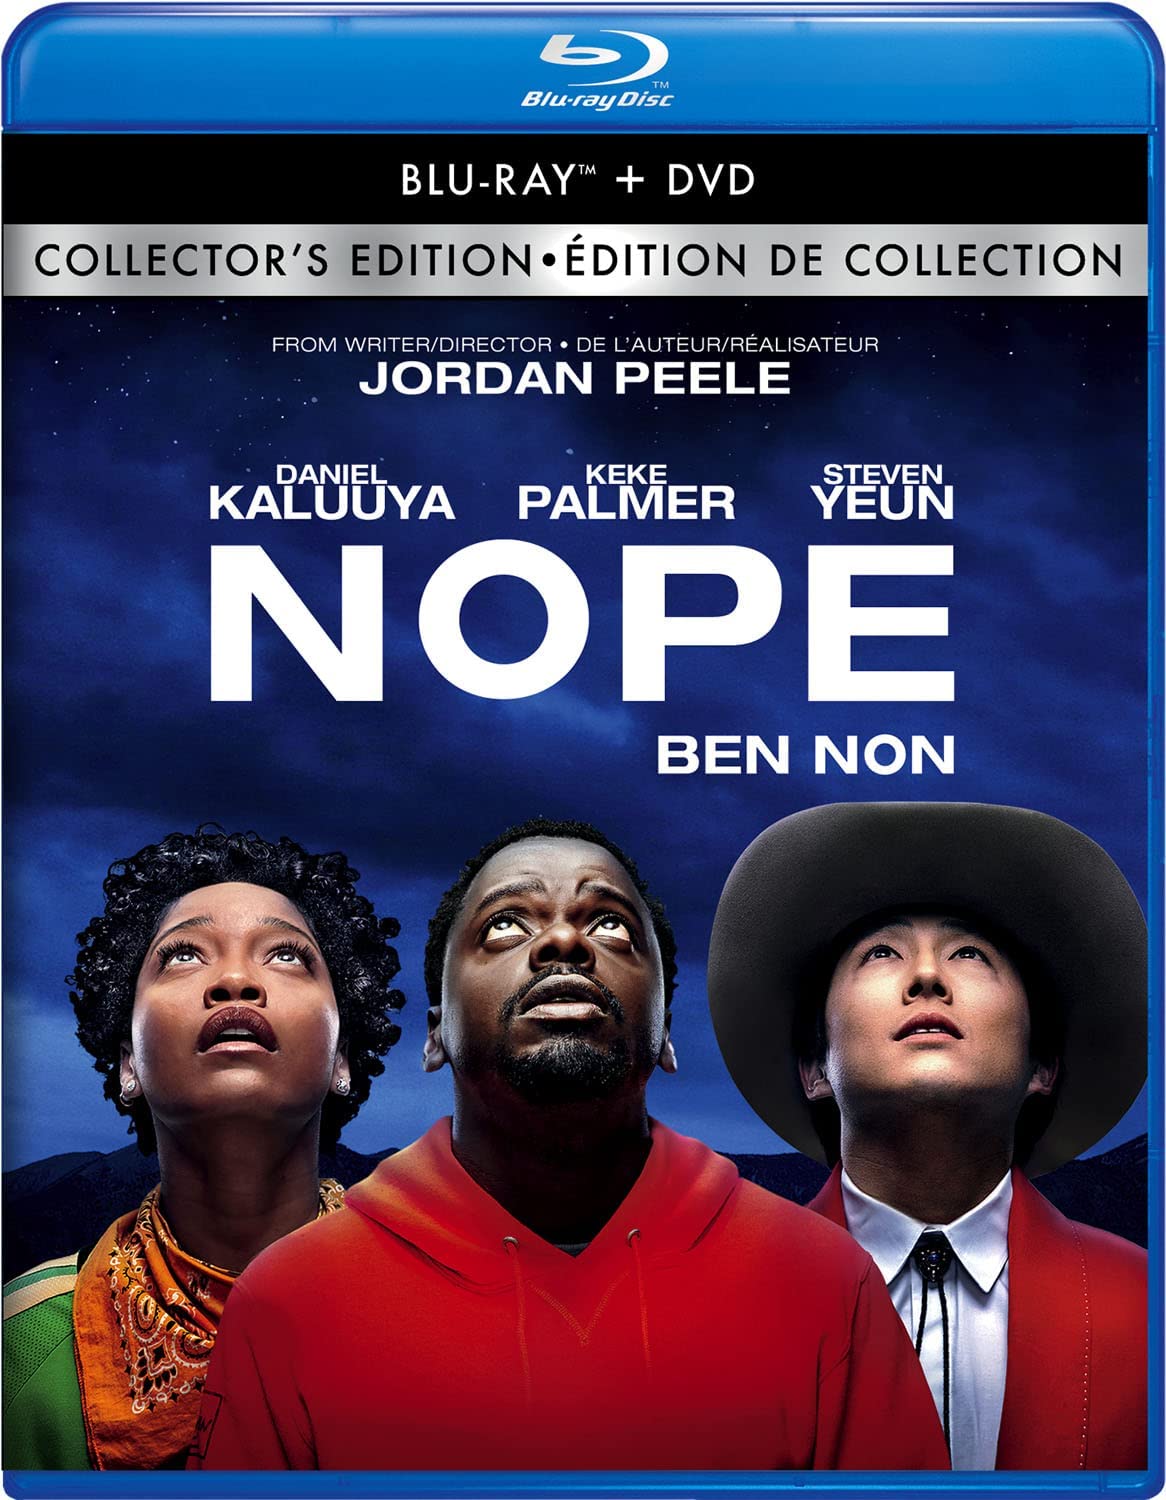 Nope Collector's Edition on Blu-ray and DVD